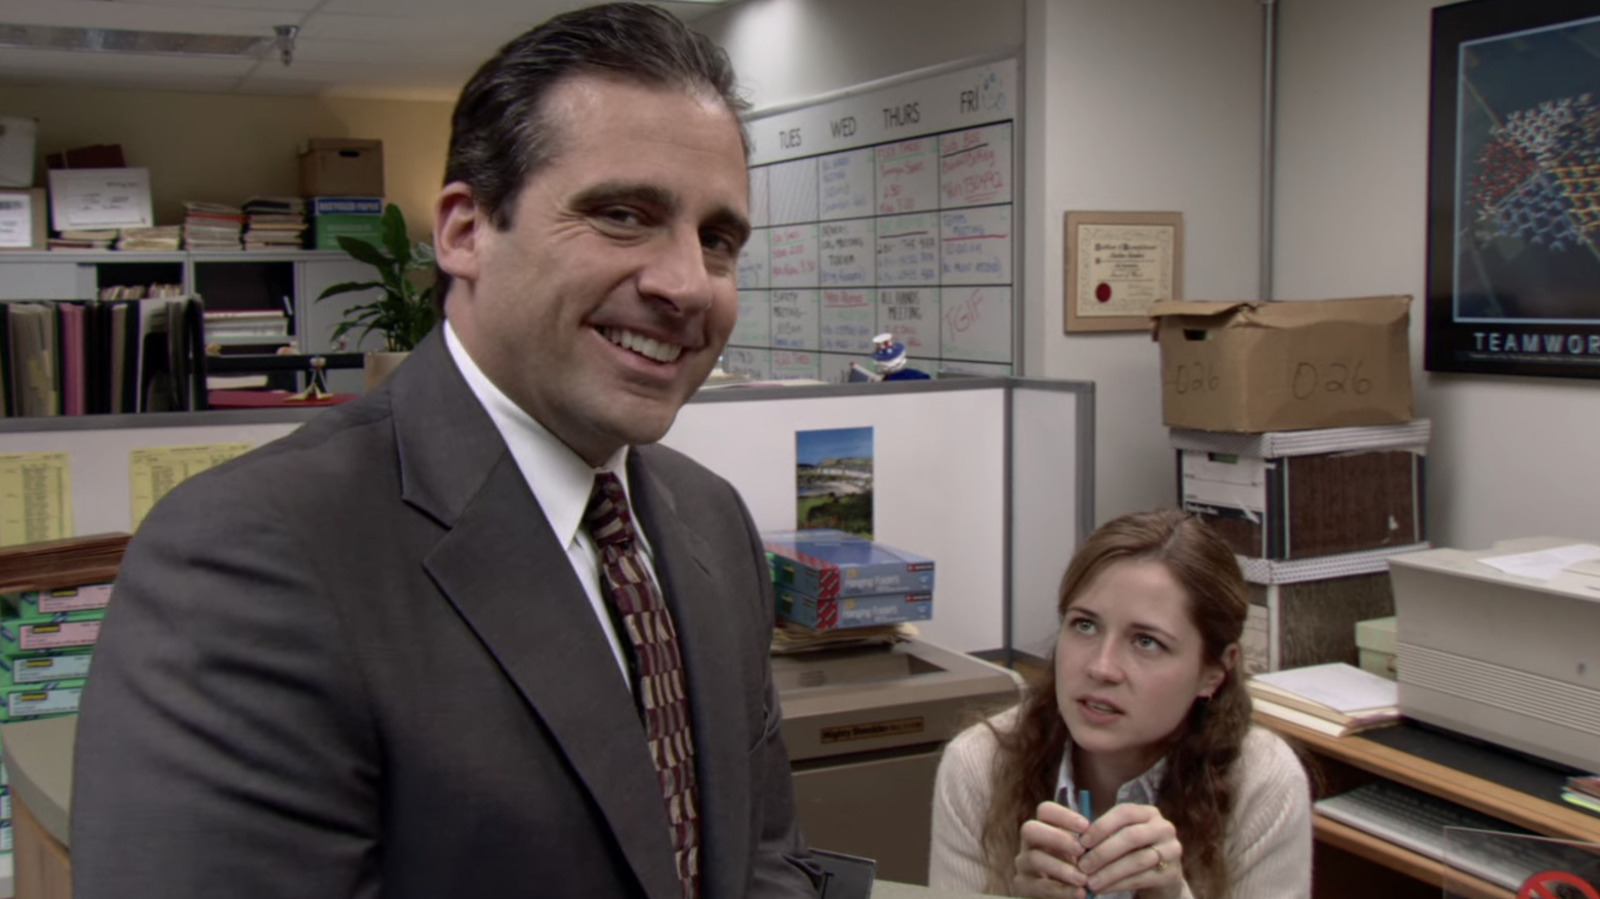 #The Office Creator Greg Daniels Would Return To Dunder Mifflin, But There’s A Catch